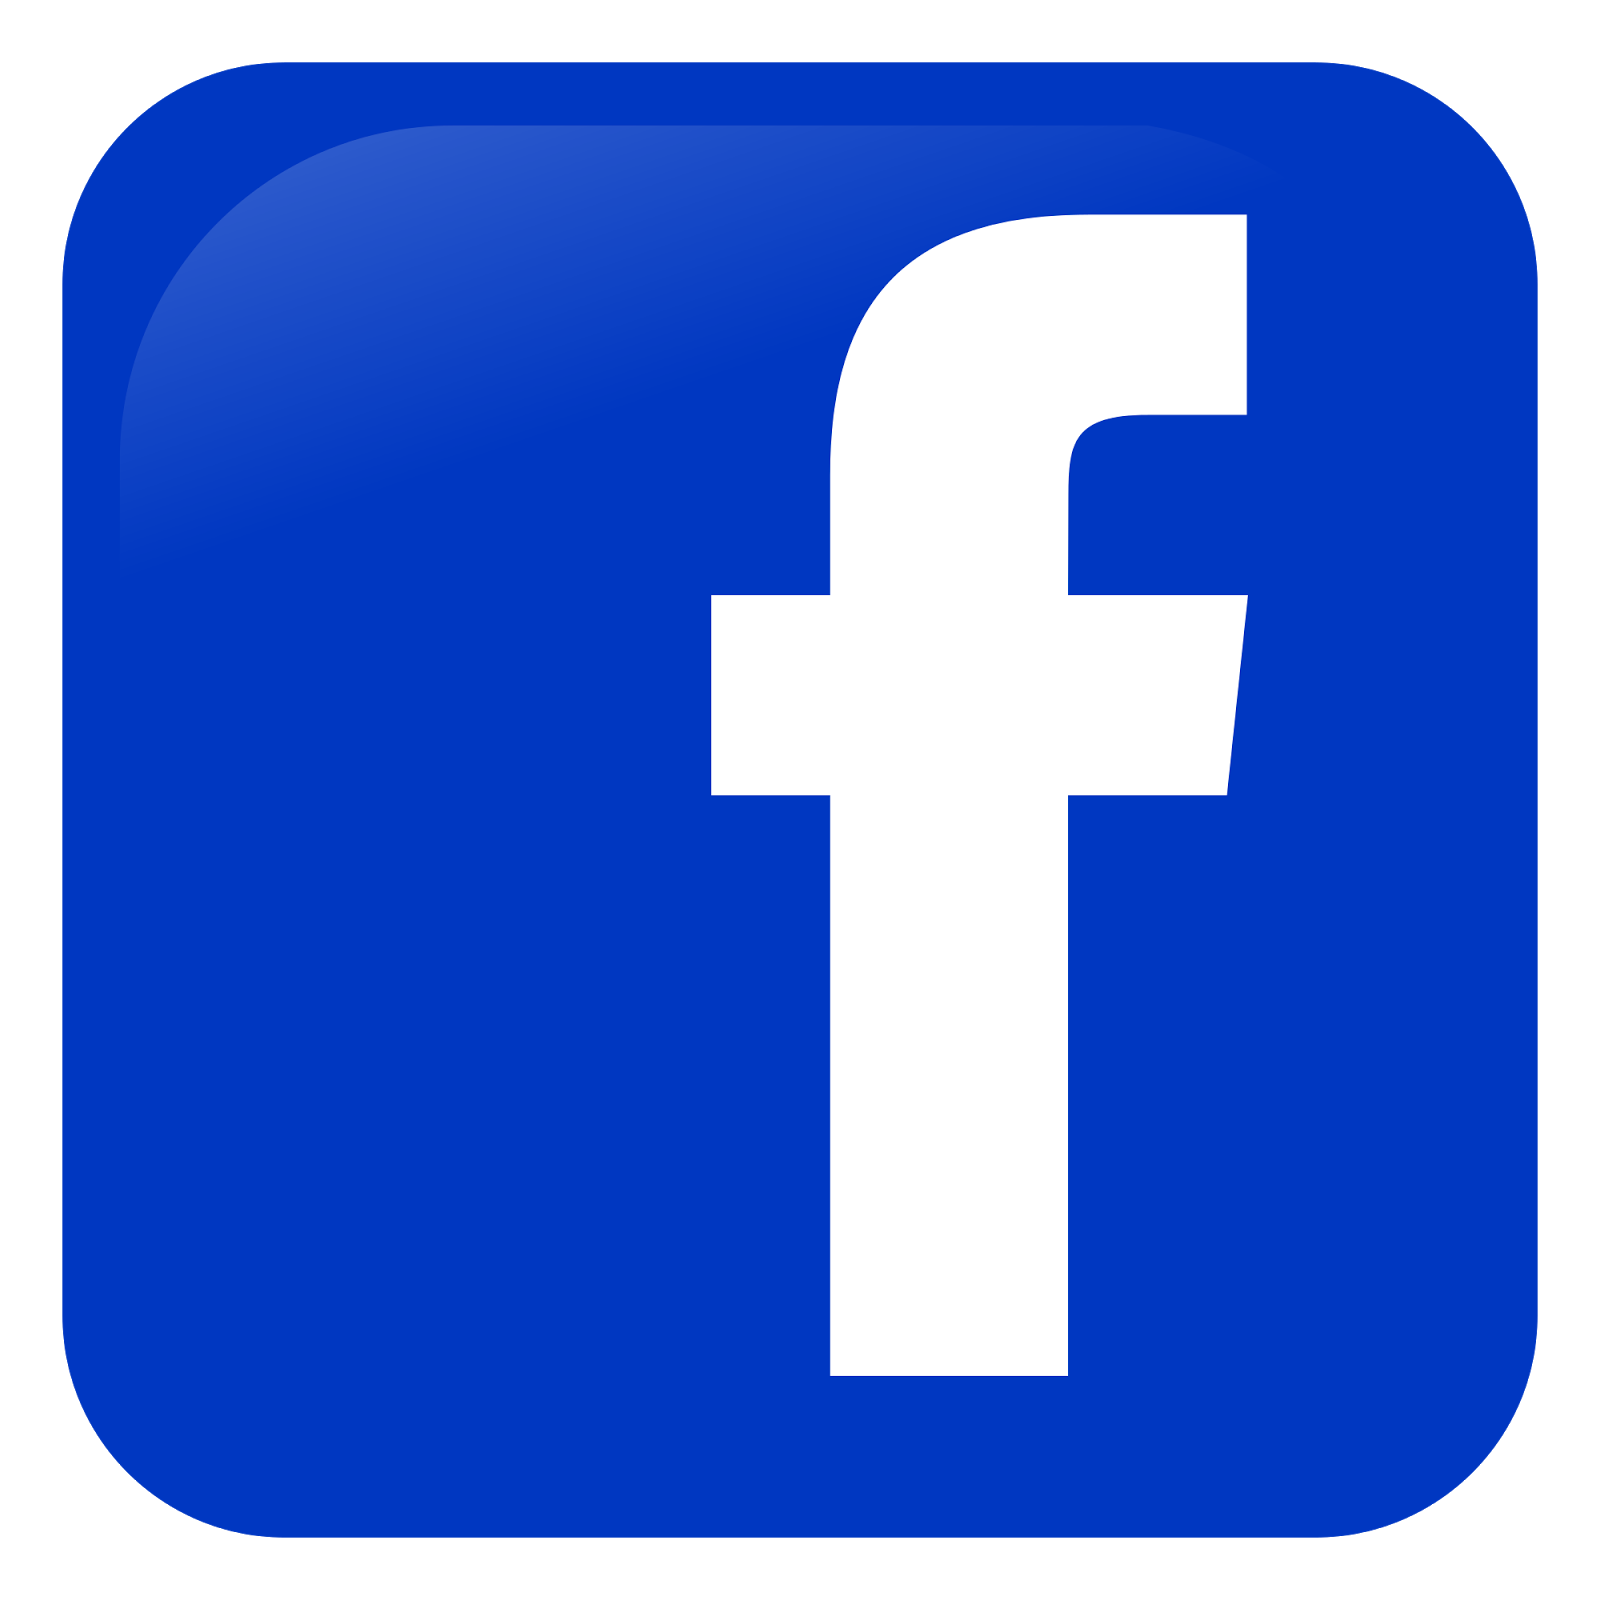 This is our Facebook fan page